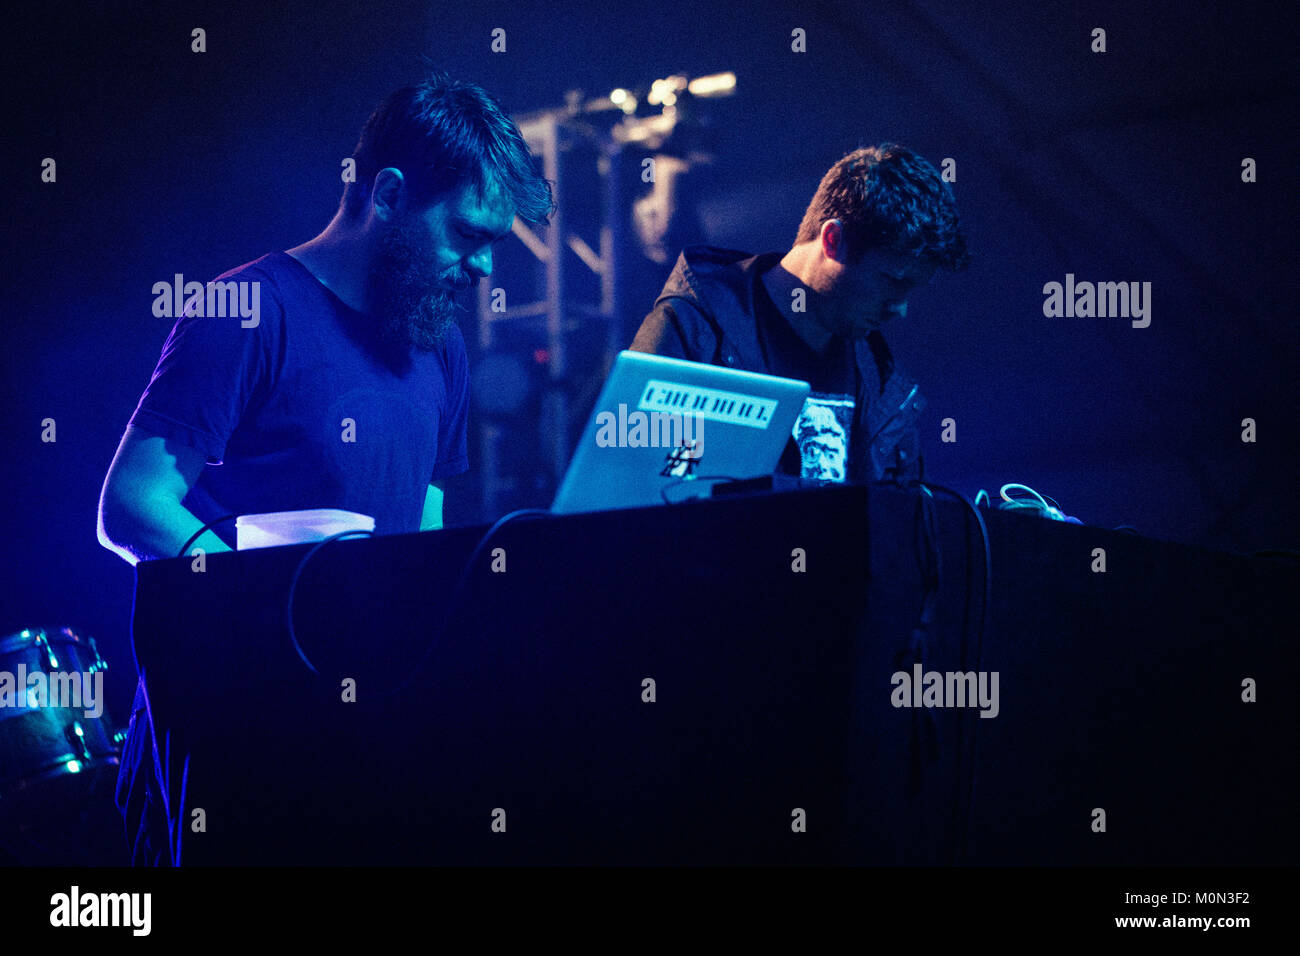 The American rap and producer trio Clipping performs a live concert at the  Polish music festival Off Festival 2014 in Katowice. It consists of rapper  Daveed Diggs and the producers William Hutson (